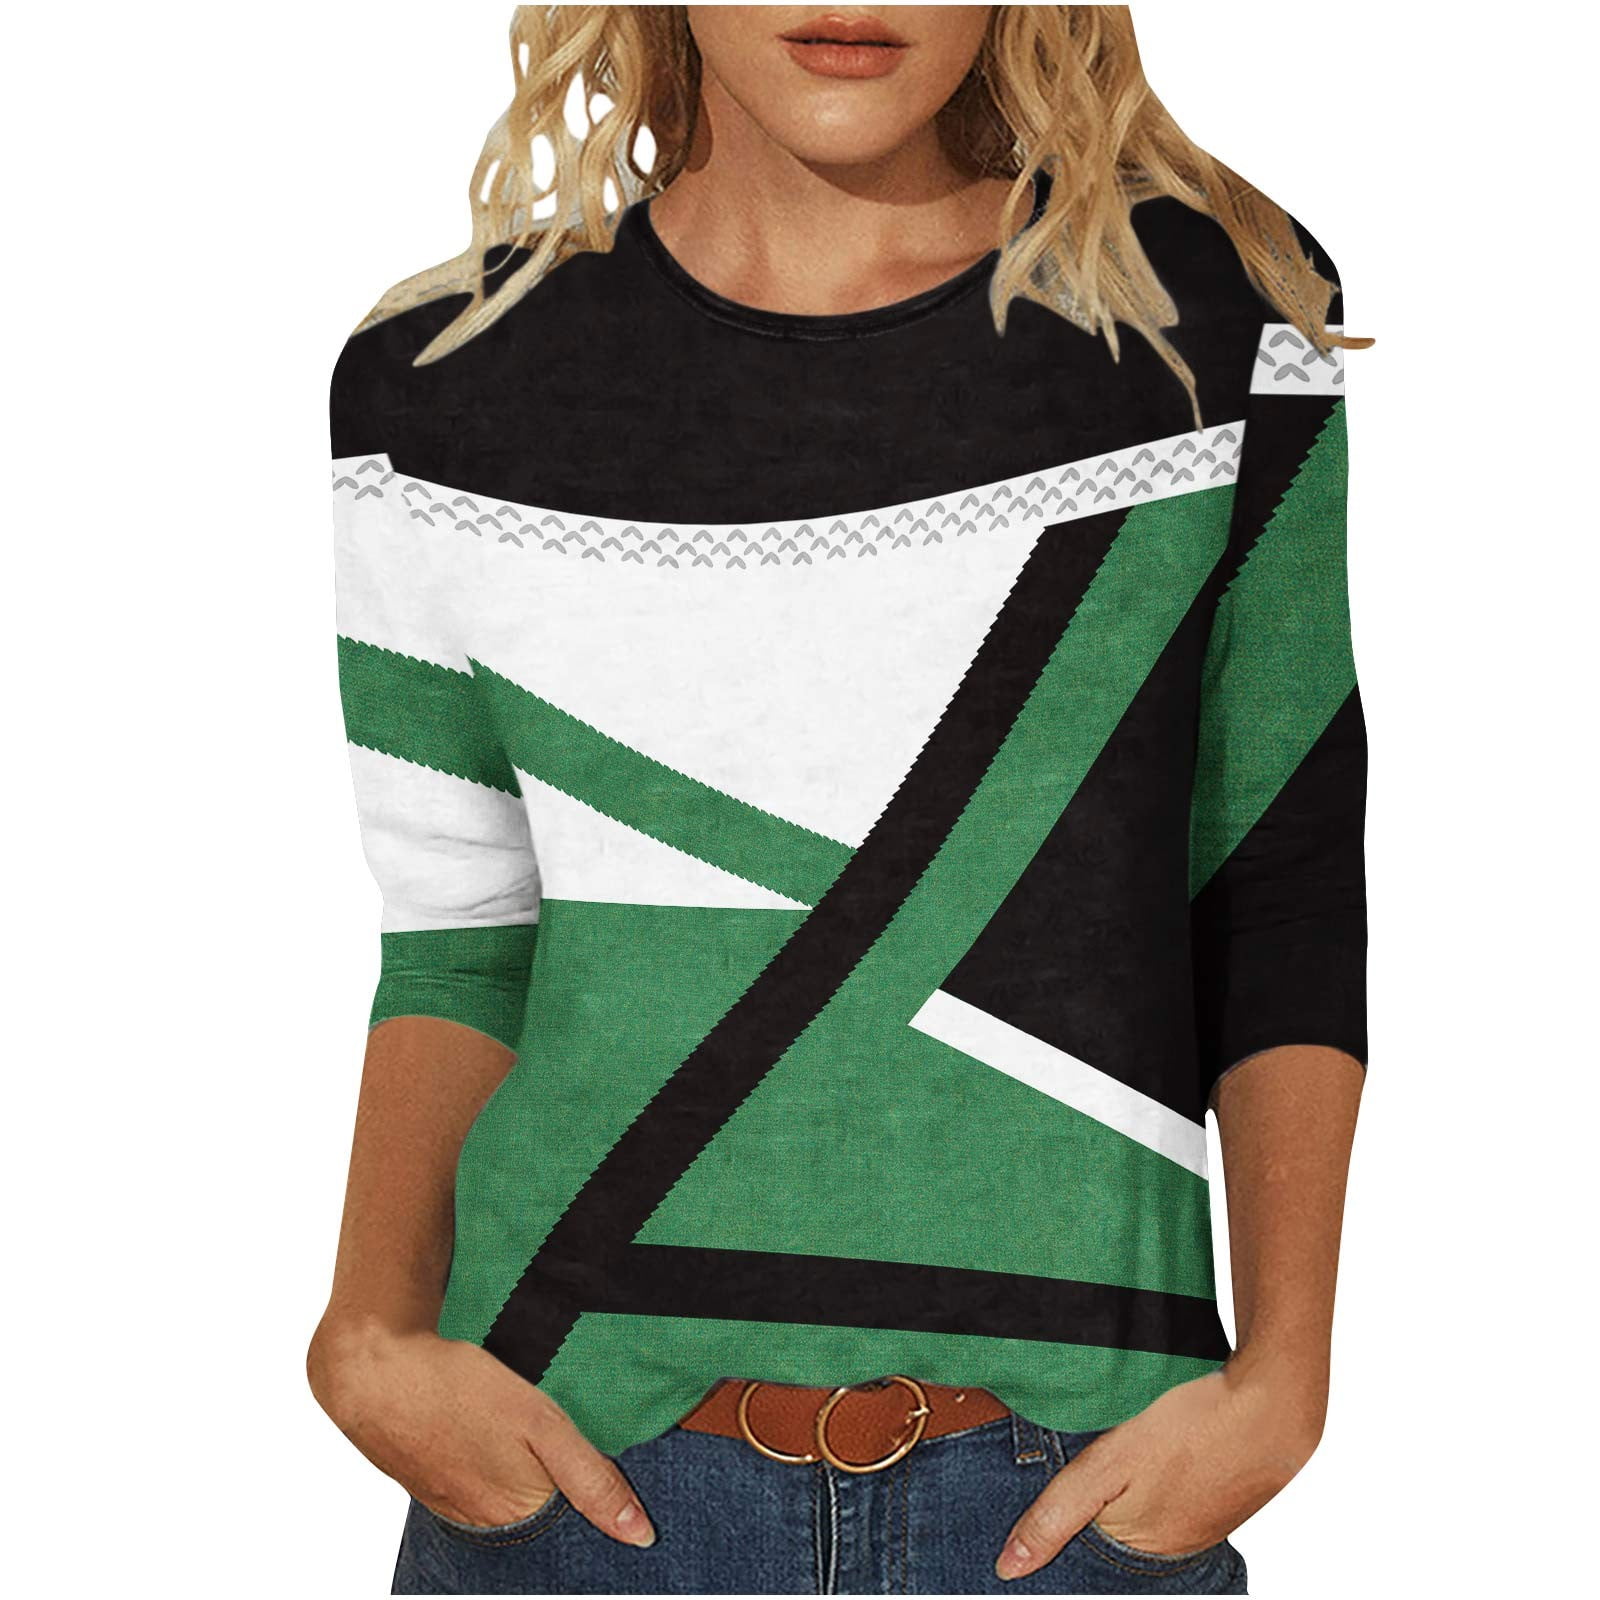 RQYYD Reduced Women's Summer Geometric Graphic T Shirts Casual Holiday 3/4  Sleeve Tops Color Block Crew Neck Basic Tee(Green,S)